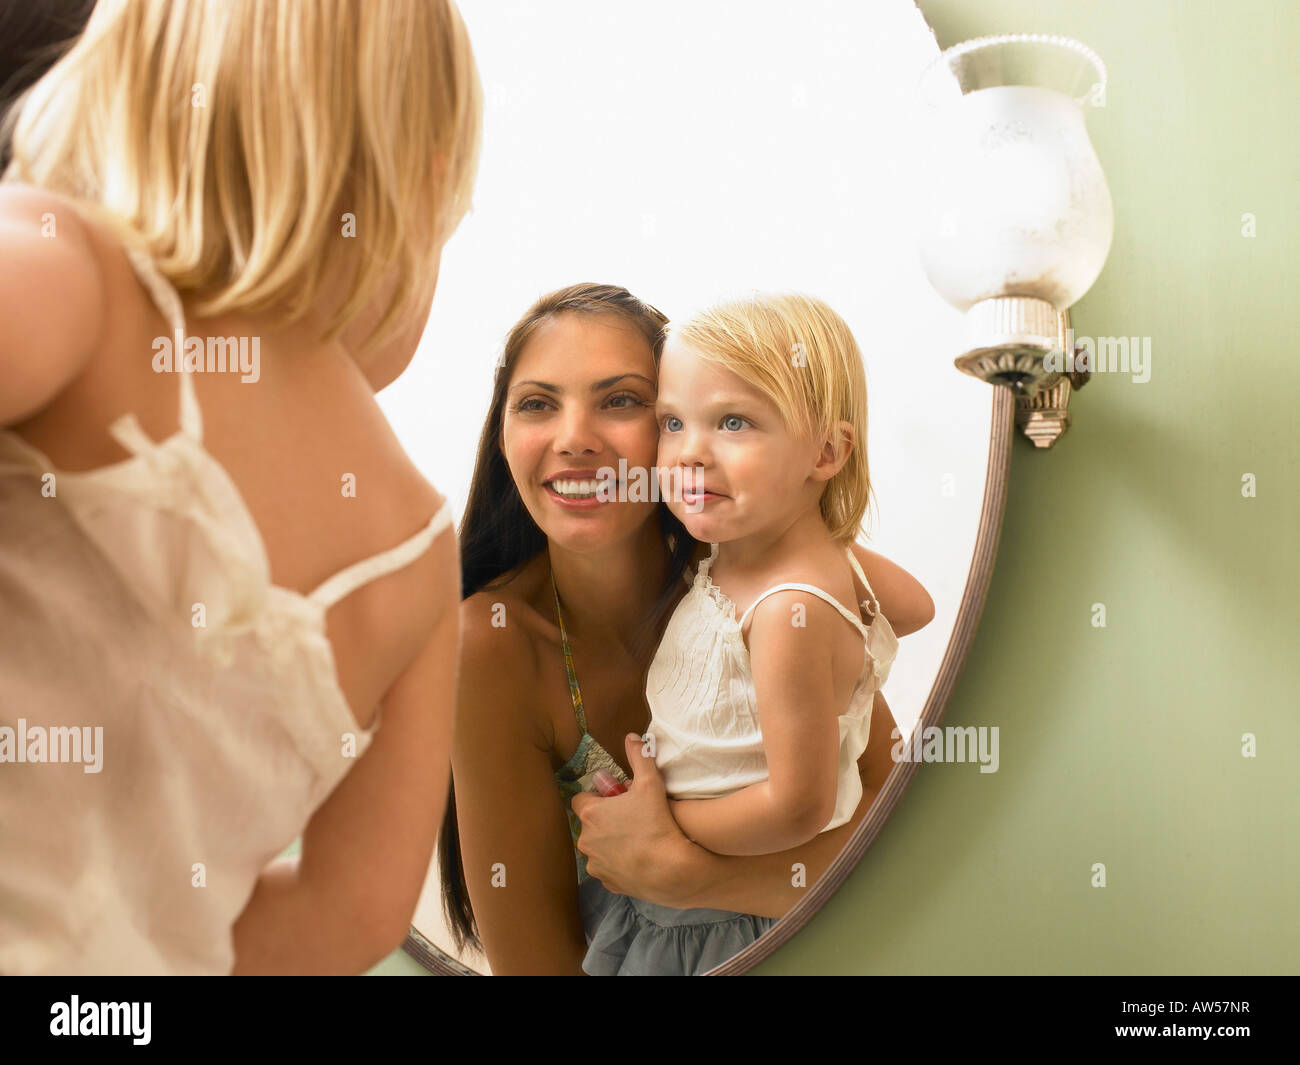 Mother and daughter looking at mirror. Stock Photo